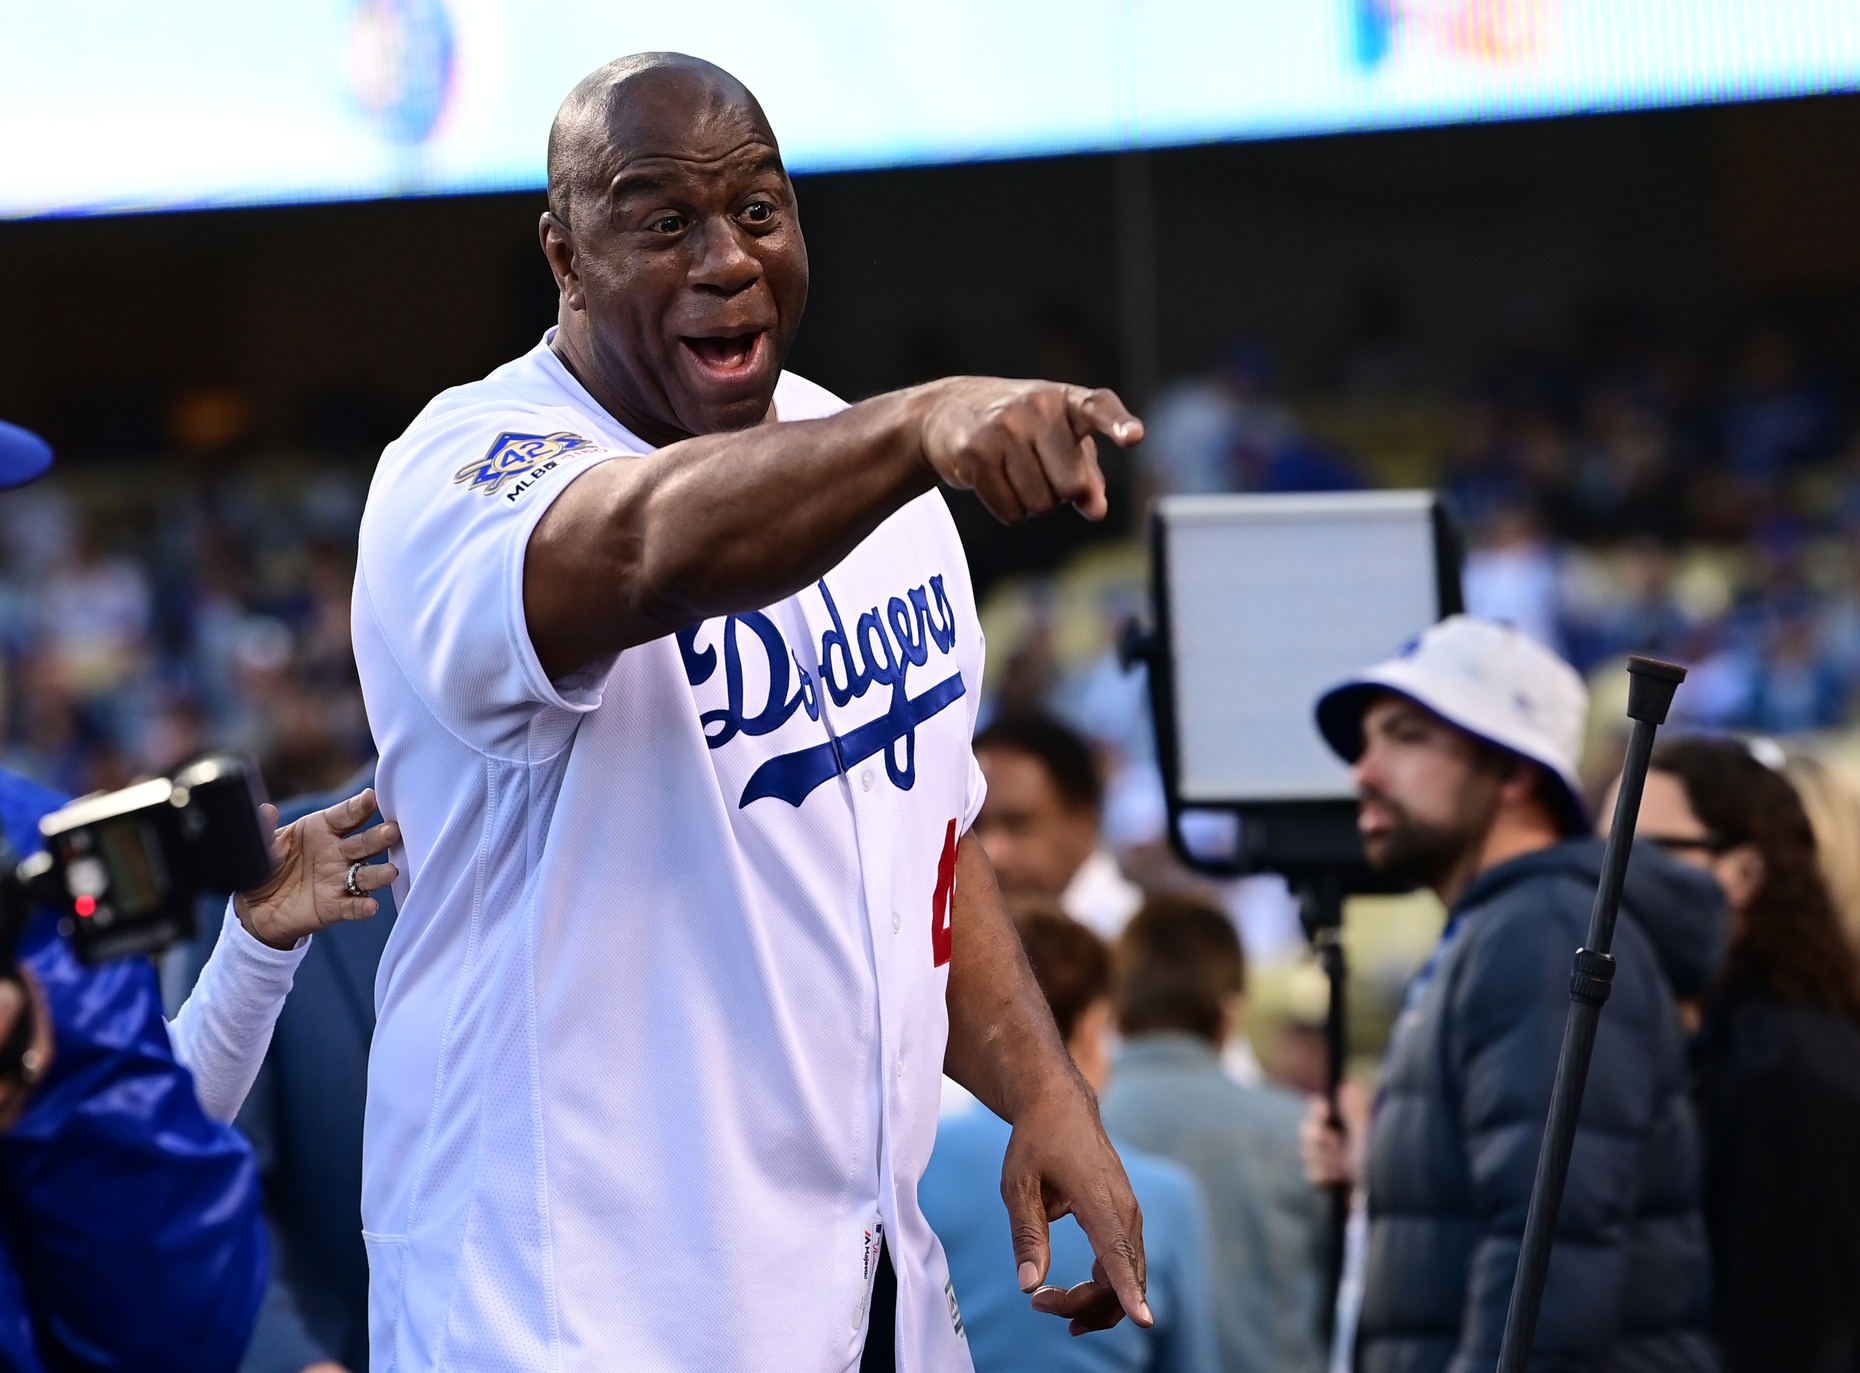 Dodgers Team Owner and Lakers Legend Magic Johnson Offers Up Positive Outlook for LA